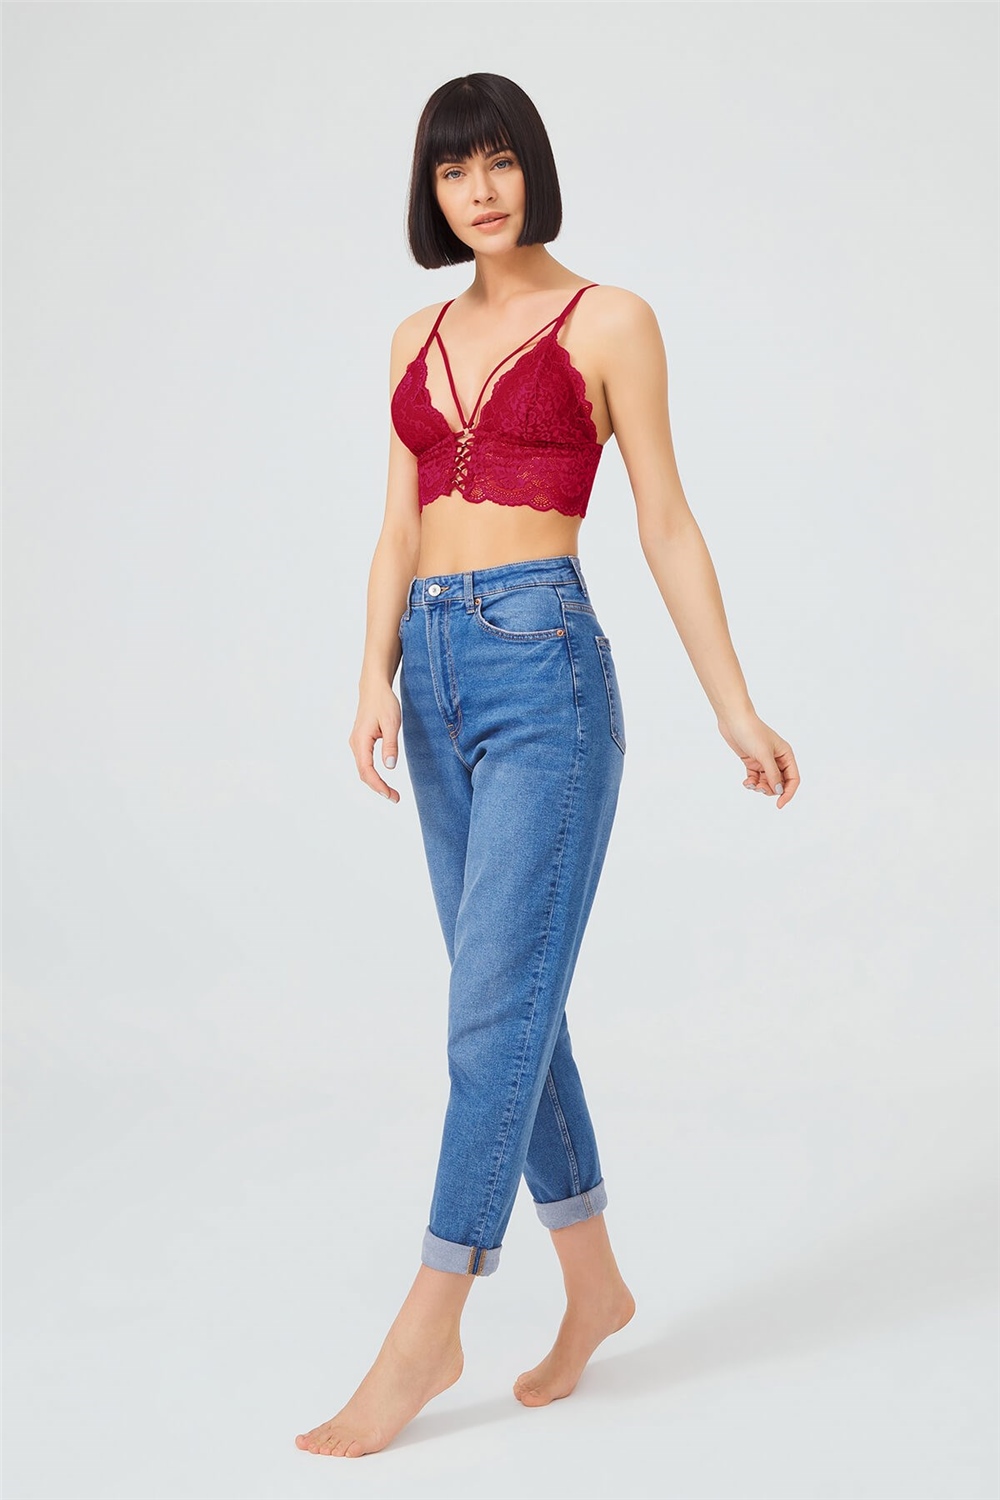 lace-triangle-padded-bralette-with-thin-shoulder-straps-ch1013-bordo-1-3